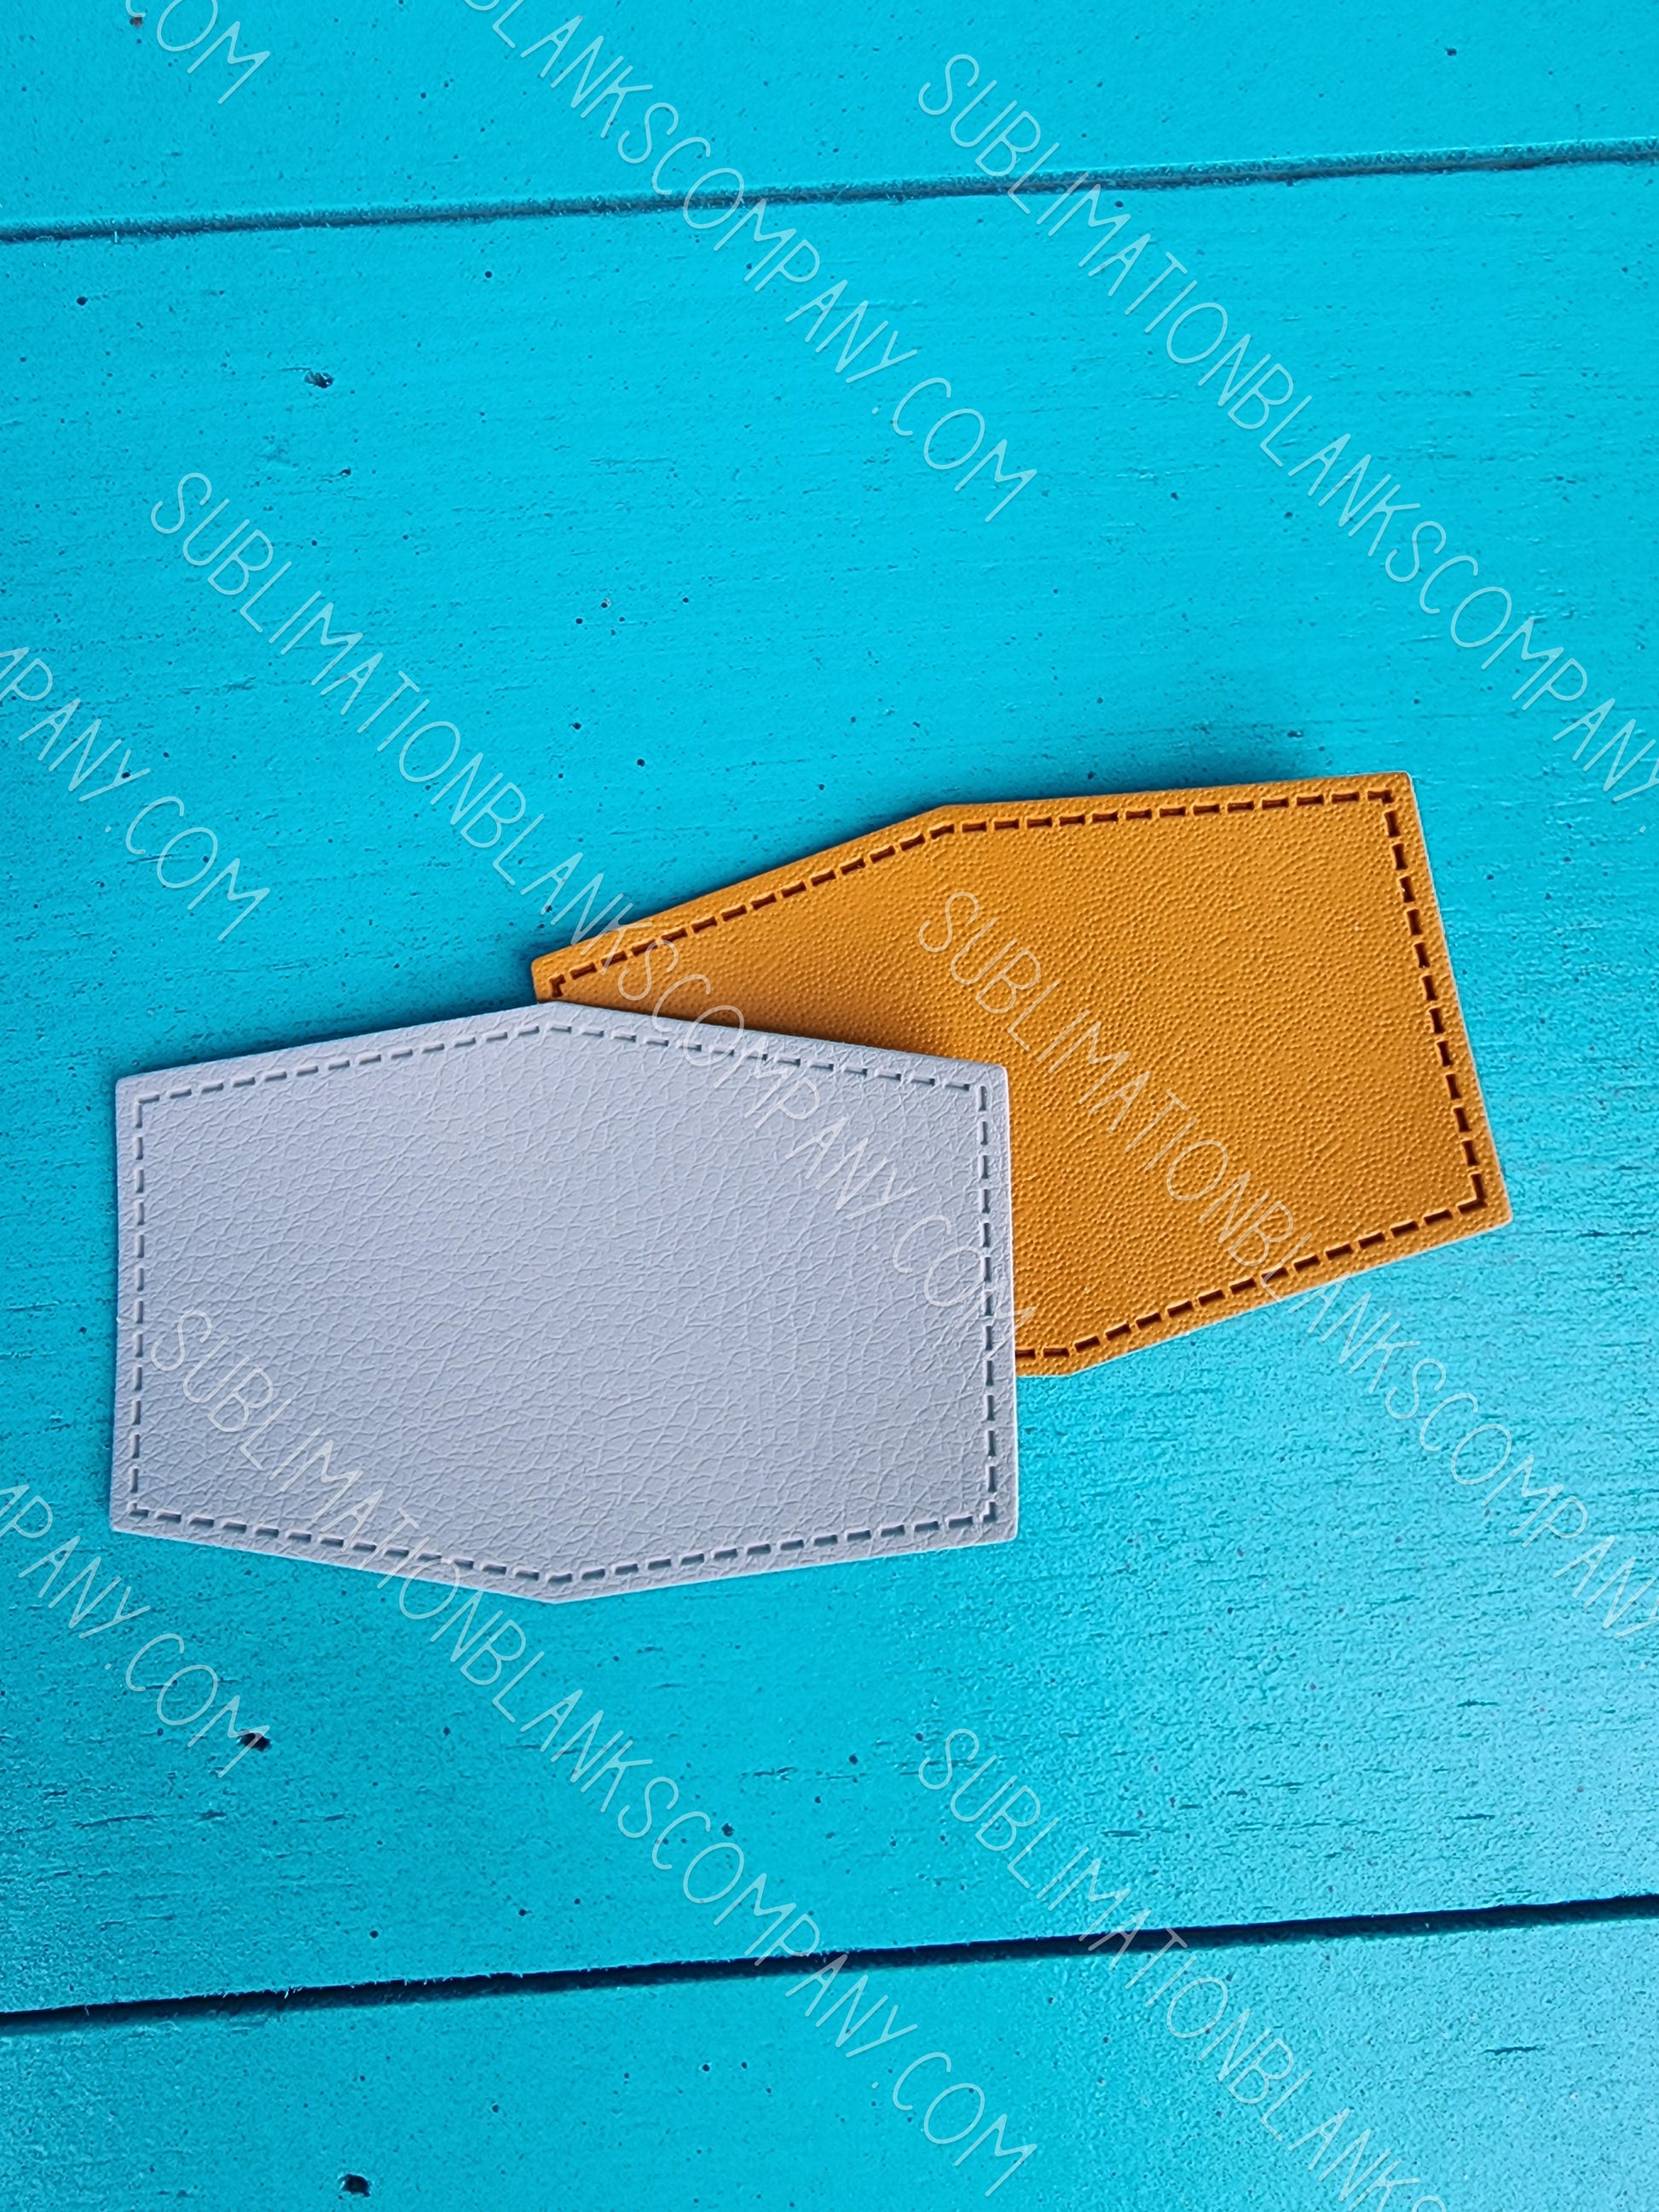 10x Pack Sublimation Blank Patches With Adhesive Sublimation Faux Leather  Patches Custom Hat Patch Blanks Blank Sublimation Patches 